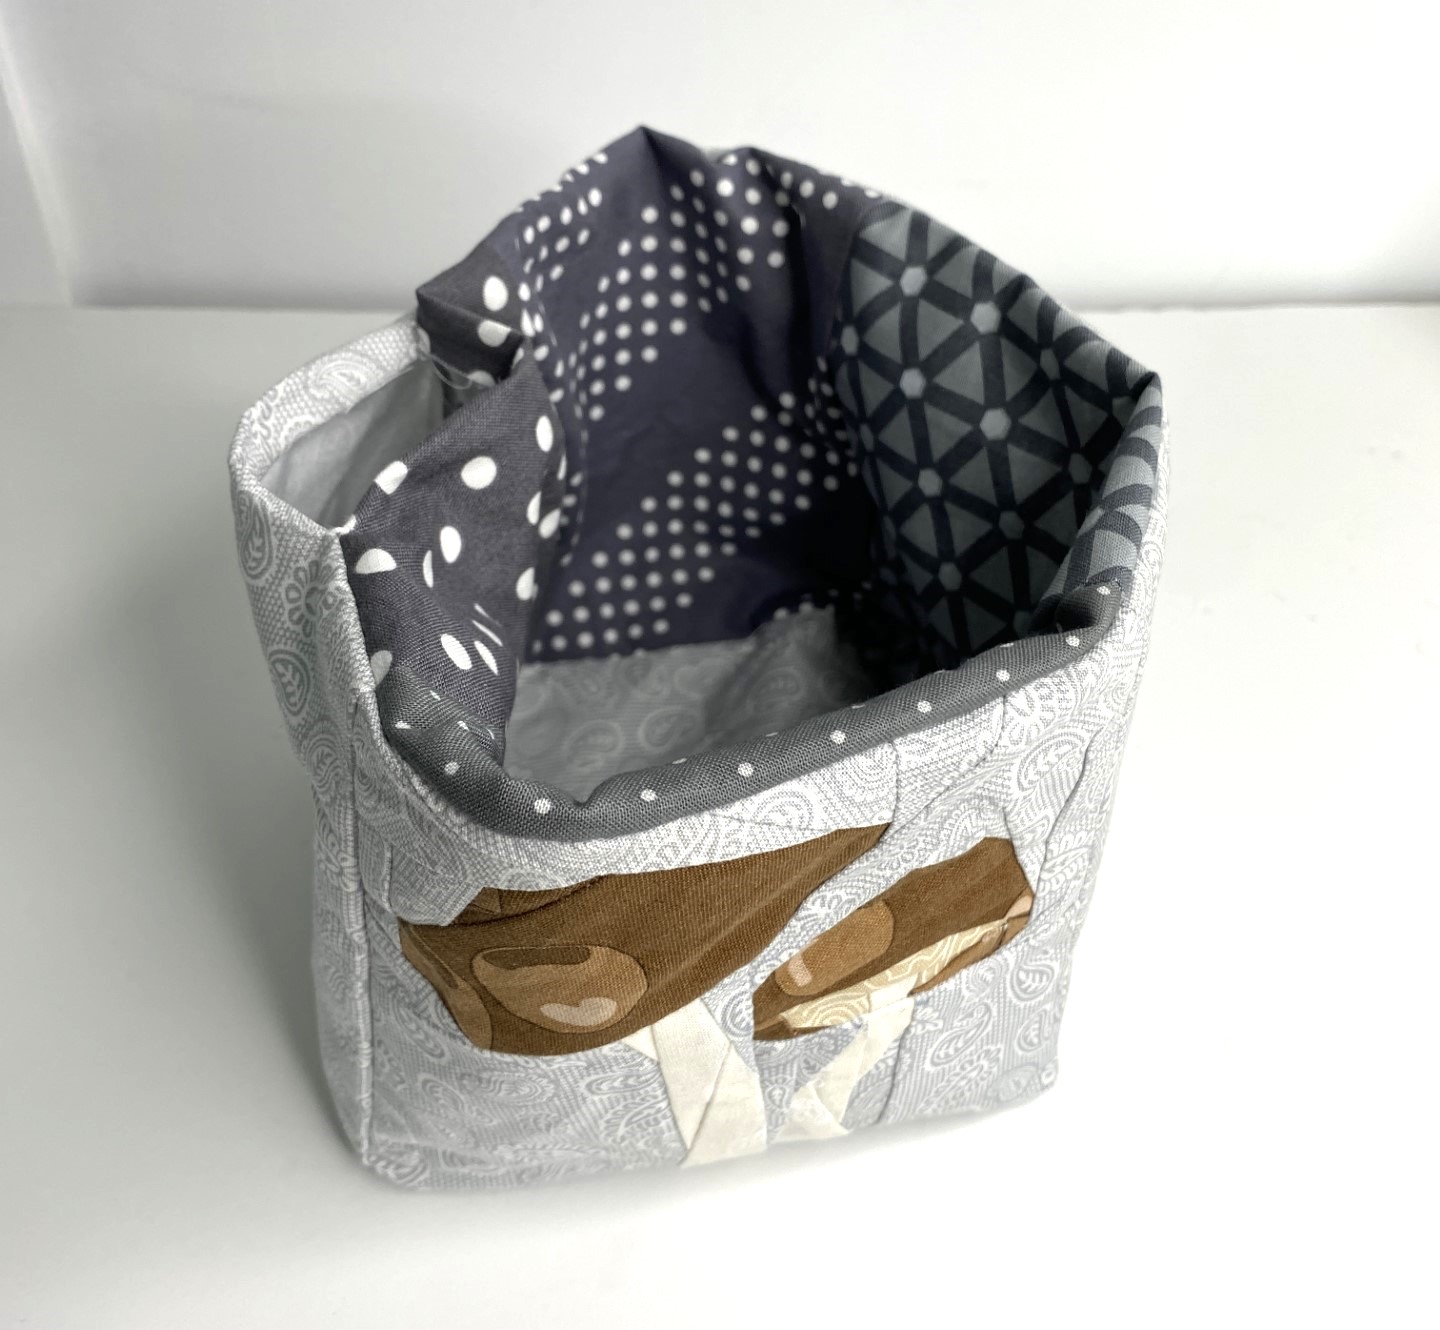 Press the top of the fabric storage box to a crisp edge and top-stitch around the top to close the hole in the lining.